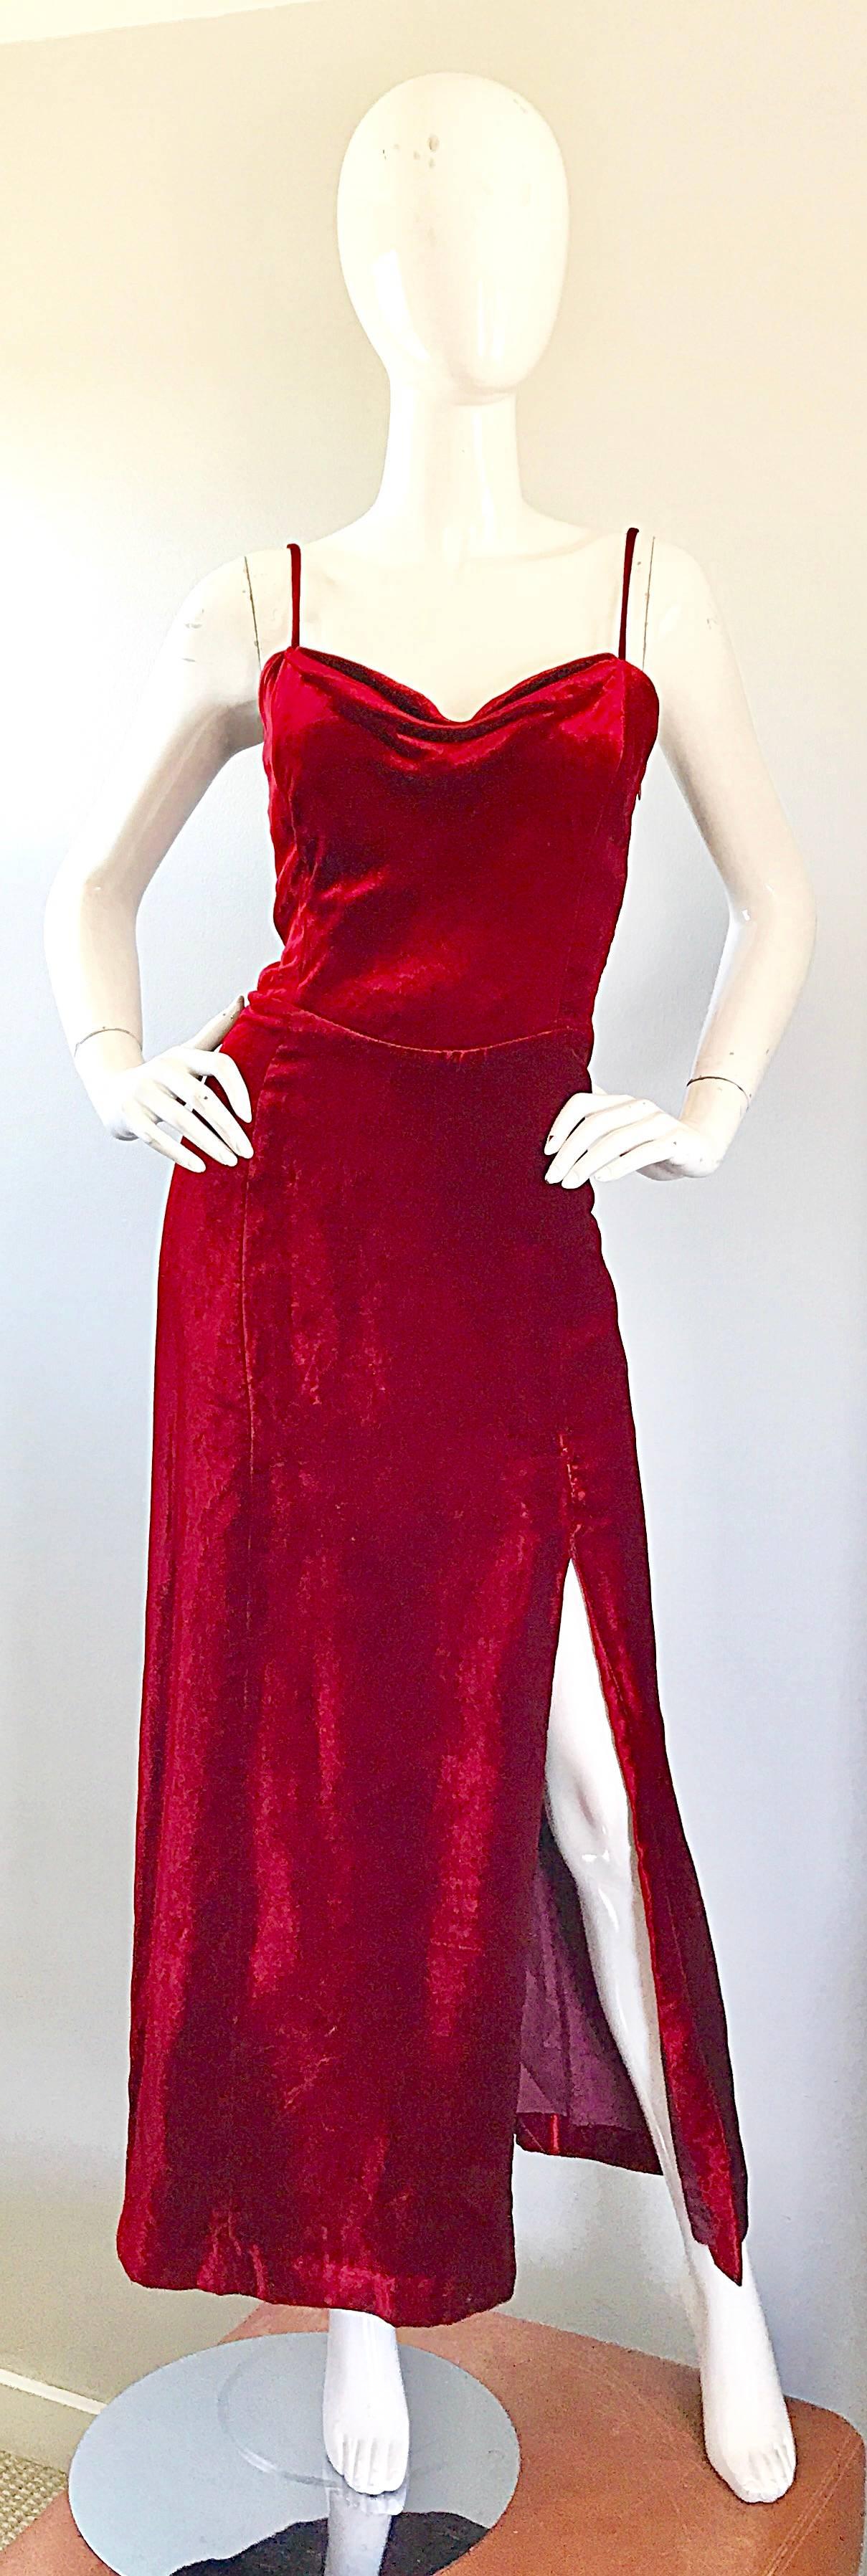 Insanely beautiful 1990s GIORGIO ARMANI COLLEZIONI crimson red silk velvet full length evening dress! Couture quality, with an amazing fit! Hidden interior weight on inner bust creates a beautiful drape at center bust, and gives this beauty a